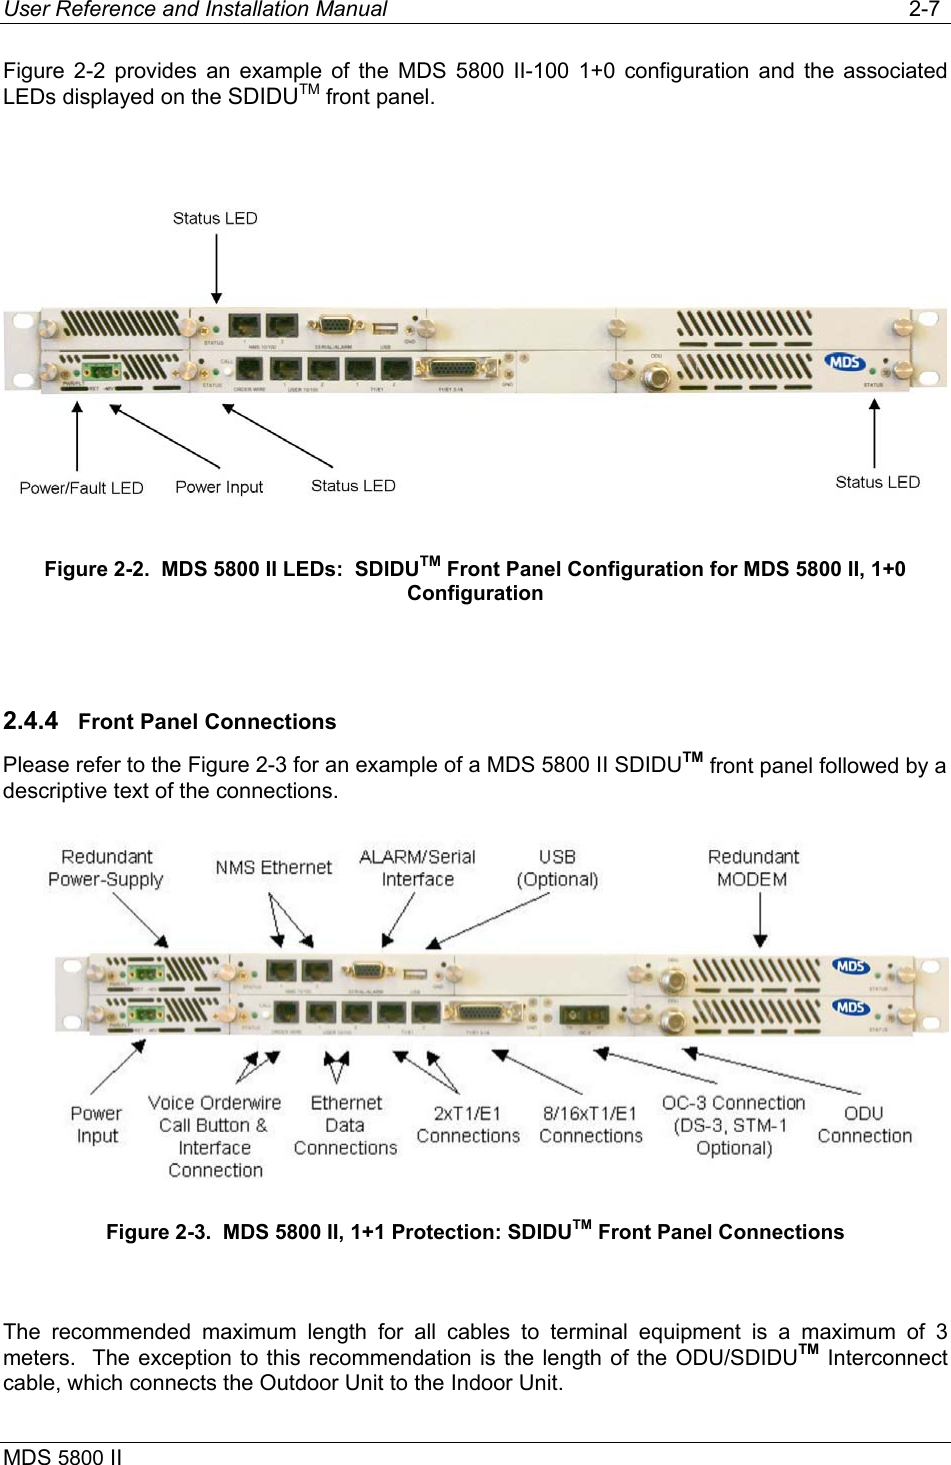 User Reference and Installation Manual   2-7 MDS 5800 II      Figure 2-2 provides an example of the MDS 5800 II-100 1+0 configuration and the associated LEDs displayed on the SDIDUTM front panel.   Figure 2-2.  MDS 5800 II LEDs:  SDIDUTM Front Panel Configuration for MDS 5800 II, 1+0 Configuration  2.4.4  Front Panel Connections Please refer to the Figure 2-3 for an example of a MDS 5800 II SDIDUTM front panel followed by a descriptive text of the connections.  Figure 2-3.  MDS 5800 II, 1+1 Protection: SDIDUTM Front Panel Connections  The recommended maximum length for all cables to terminal equipment is a maximum of 3 meters.  The exception to this recommendation is the length of the ODU/SDIDUTM Interconnect cable, which connects the Outdoor Unit to the Indoor Unit. 